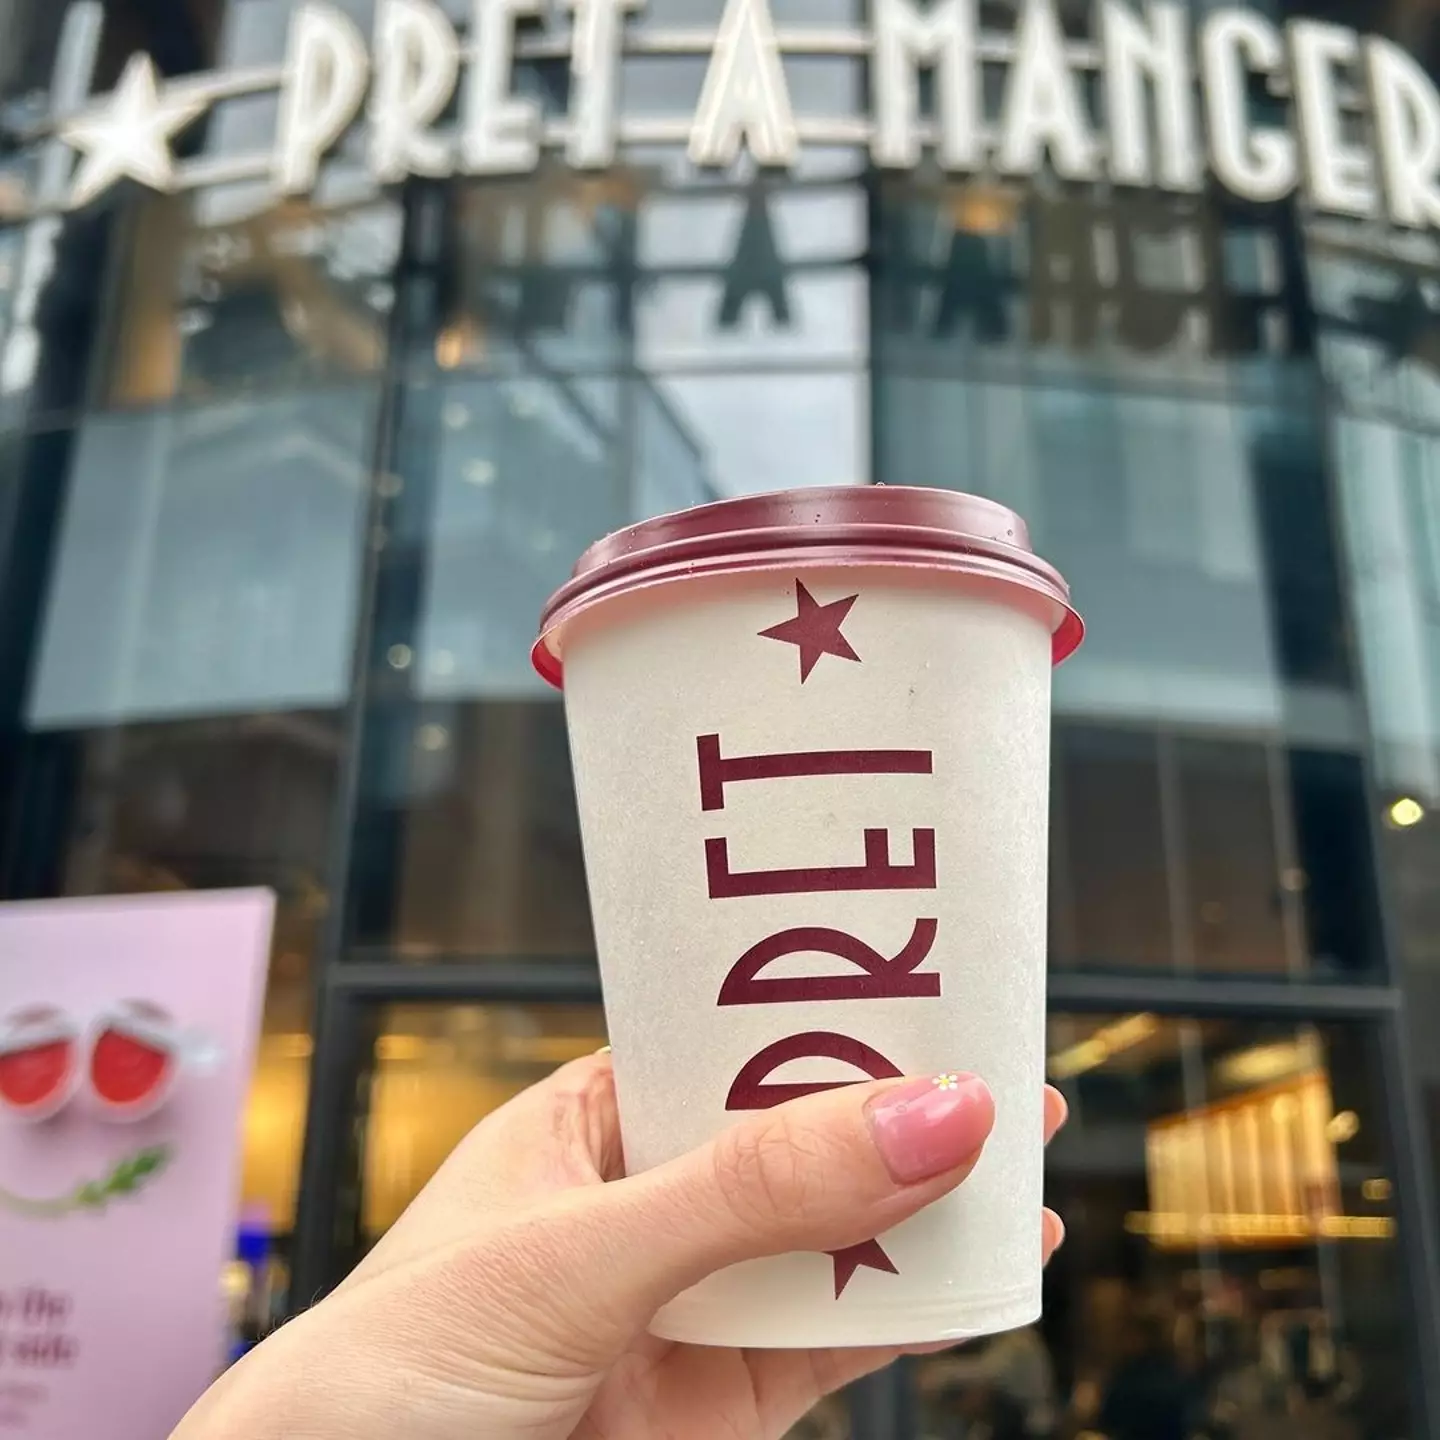 Pret A Manger is cracking down on people using a 'loophole' in its subscription service to get free coffee.